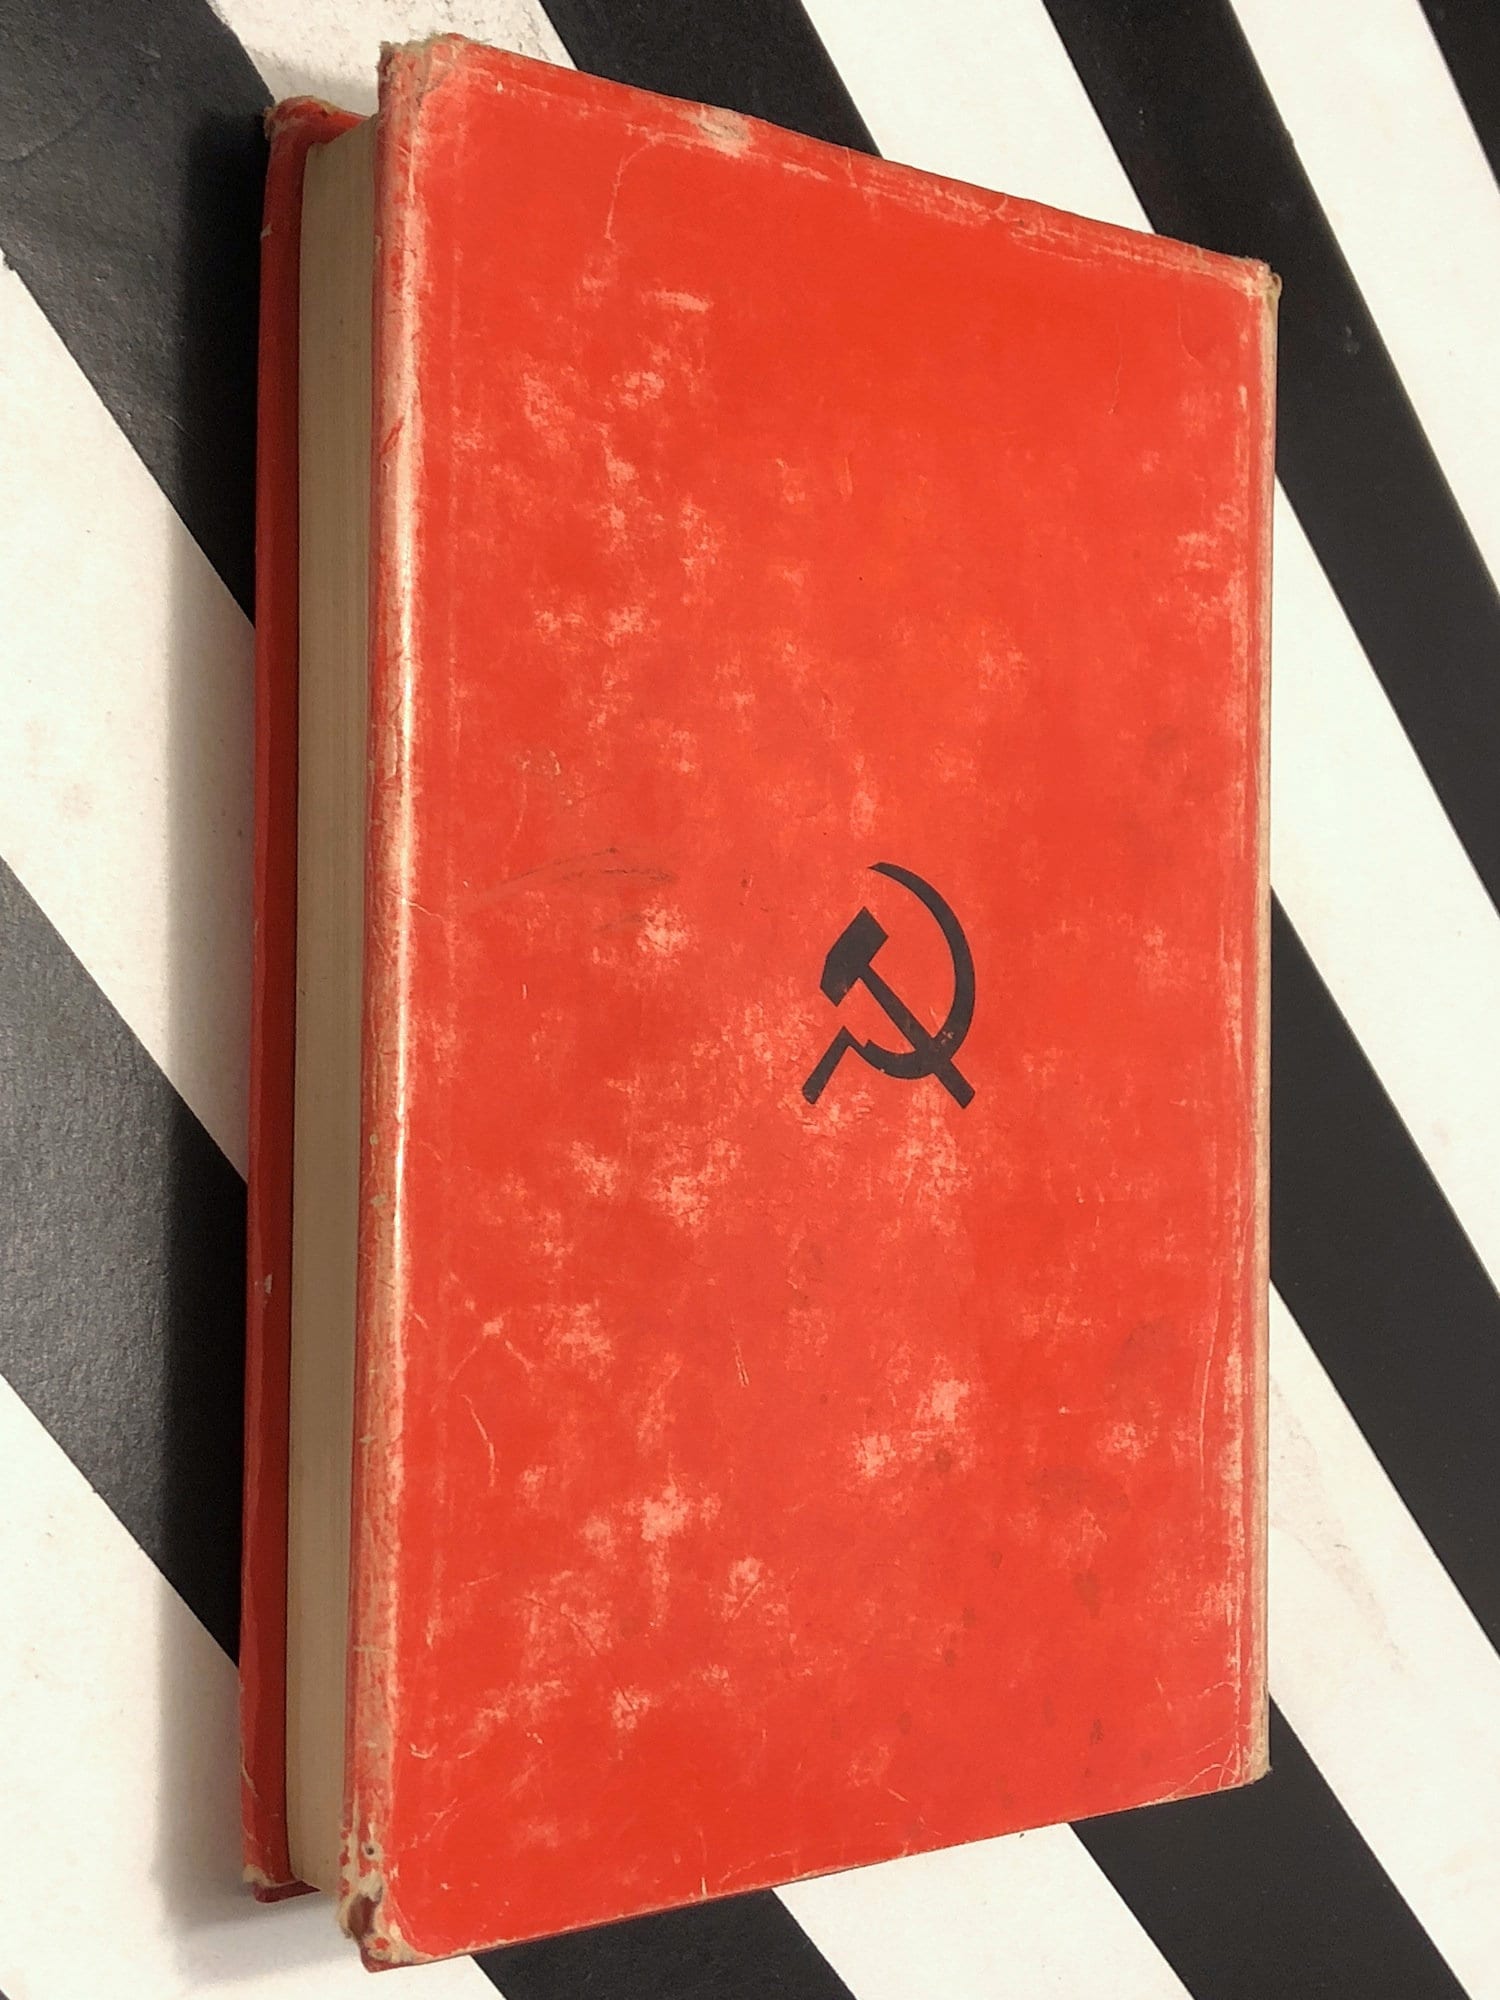 The Naked Communist by W. Cleon Skousen (1961) hardcover book